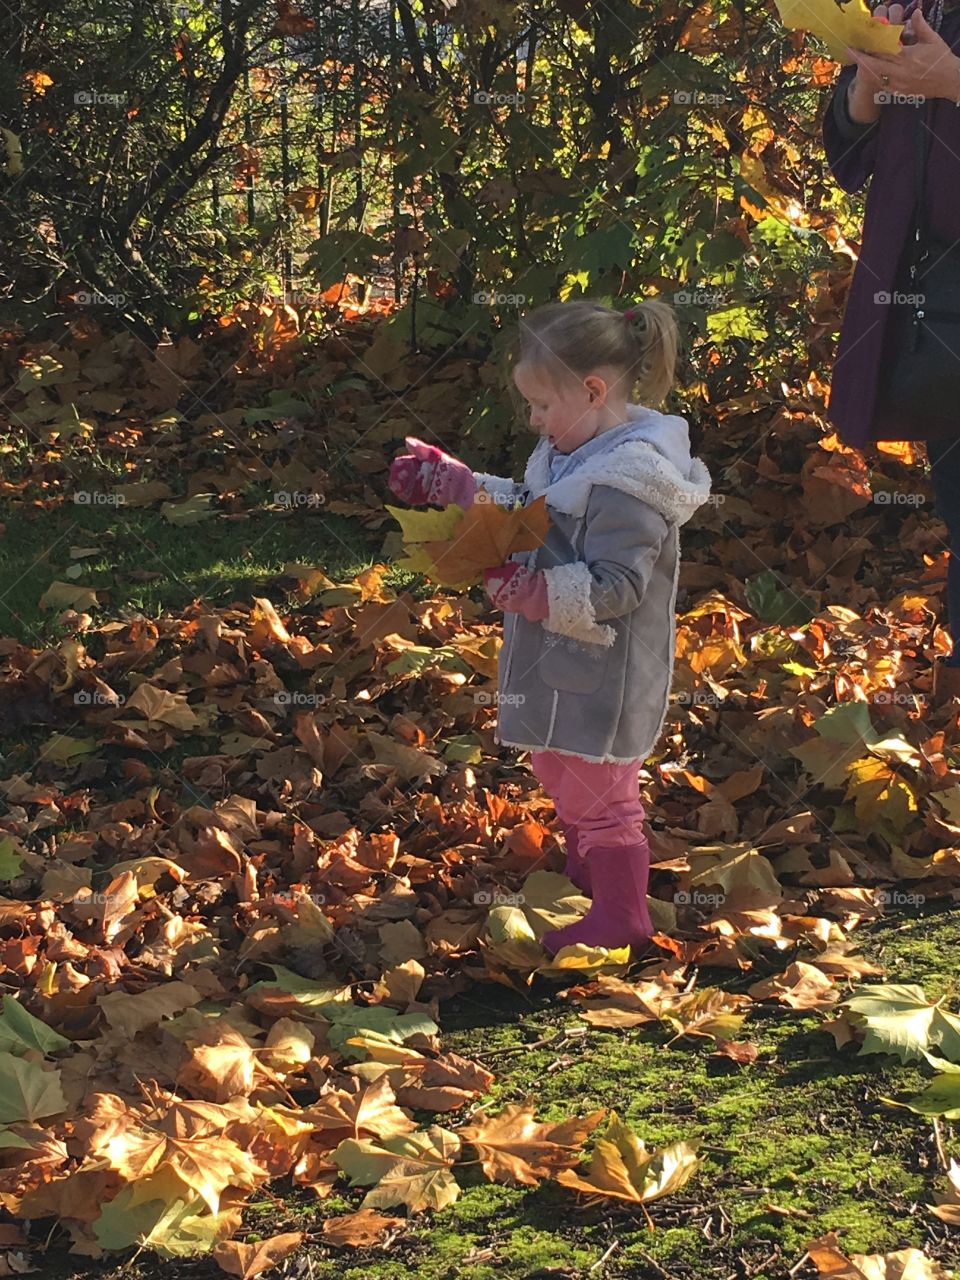 Playing with leaves. Autumn at its best